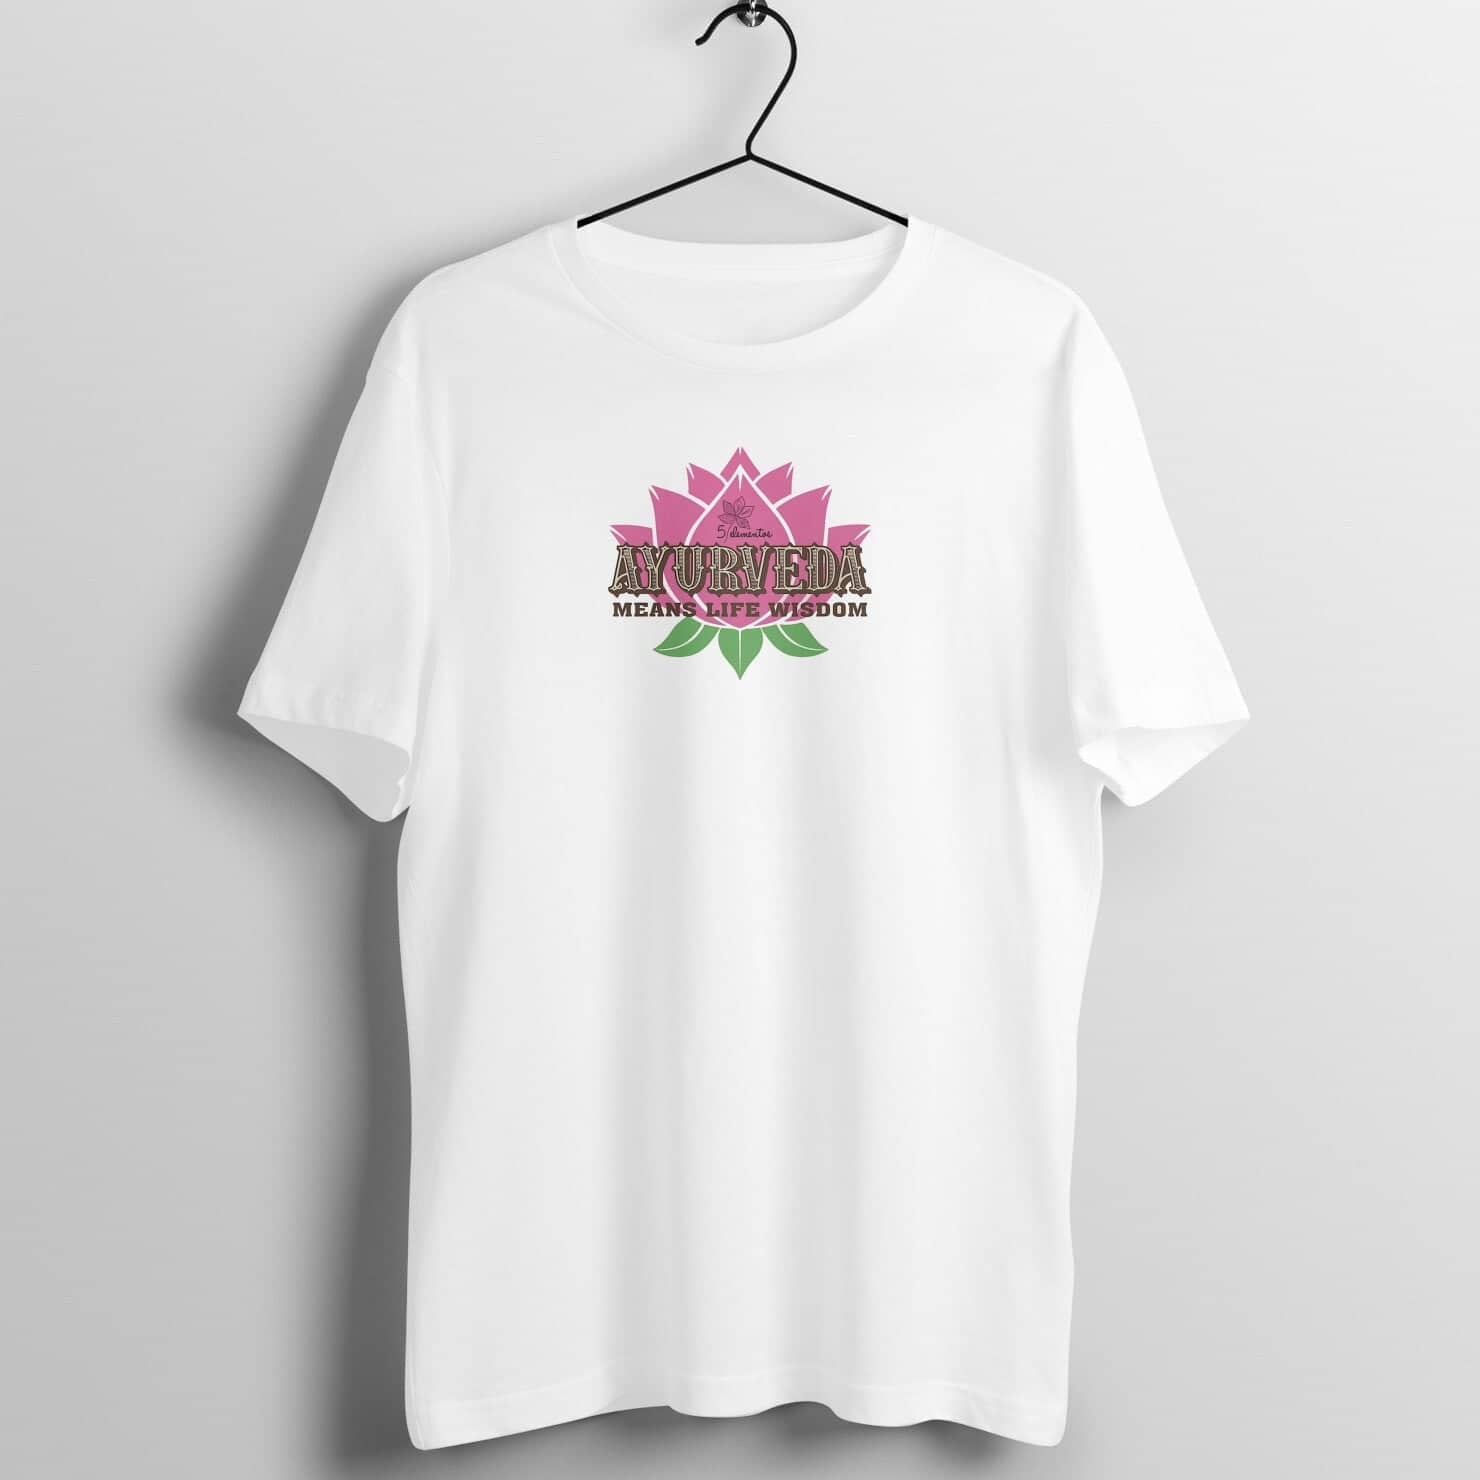 Ayurveda Means Life Wisdom Exclusive T Shirt for Women and Men freeshipping - Catch My Drift India